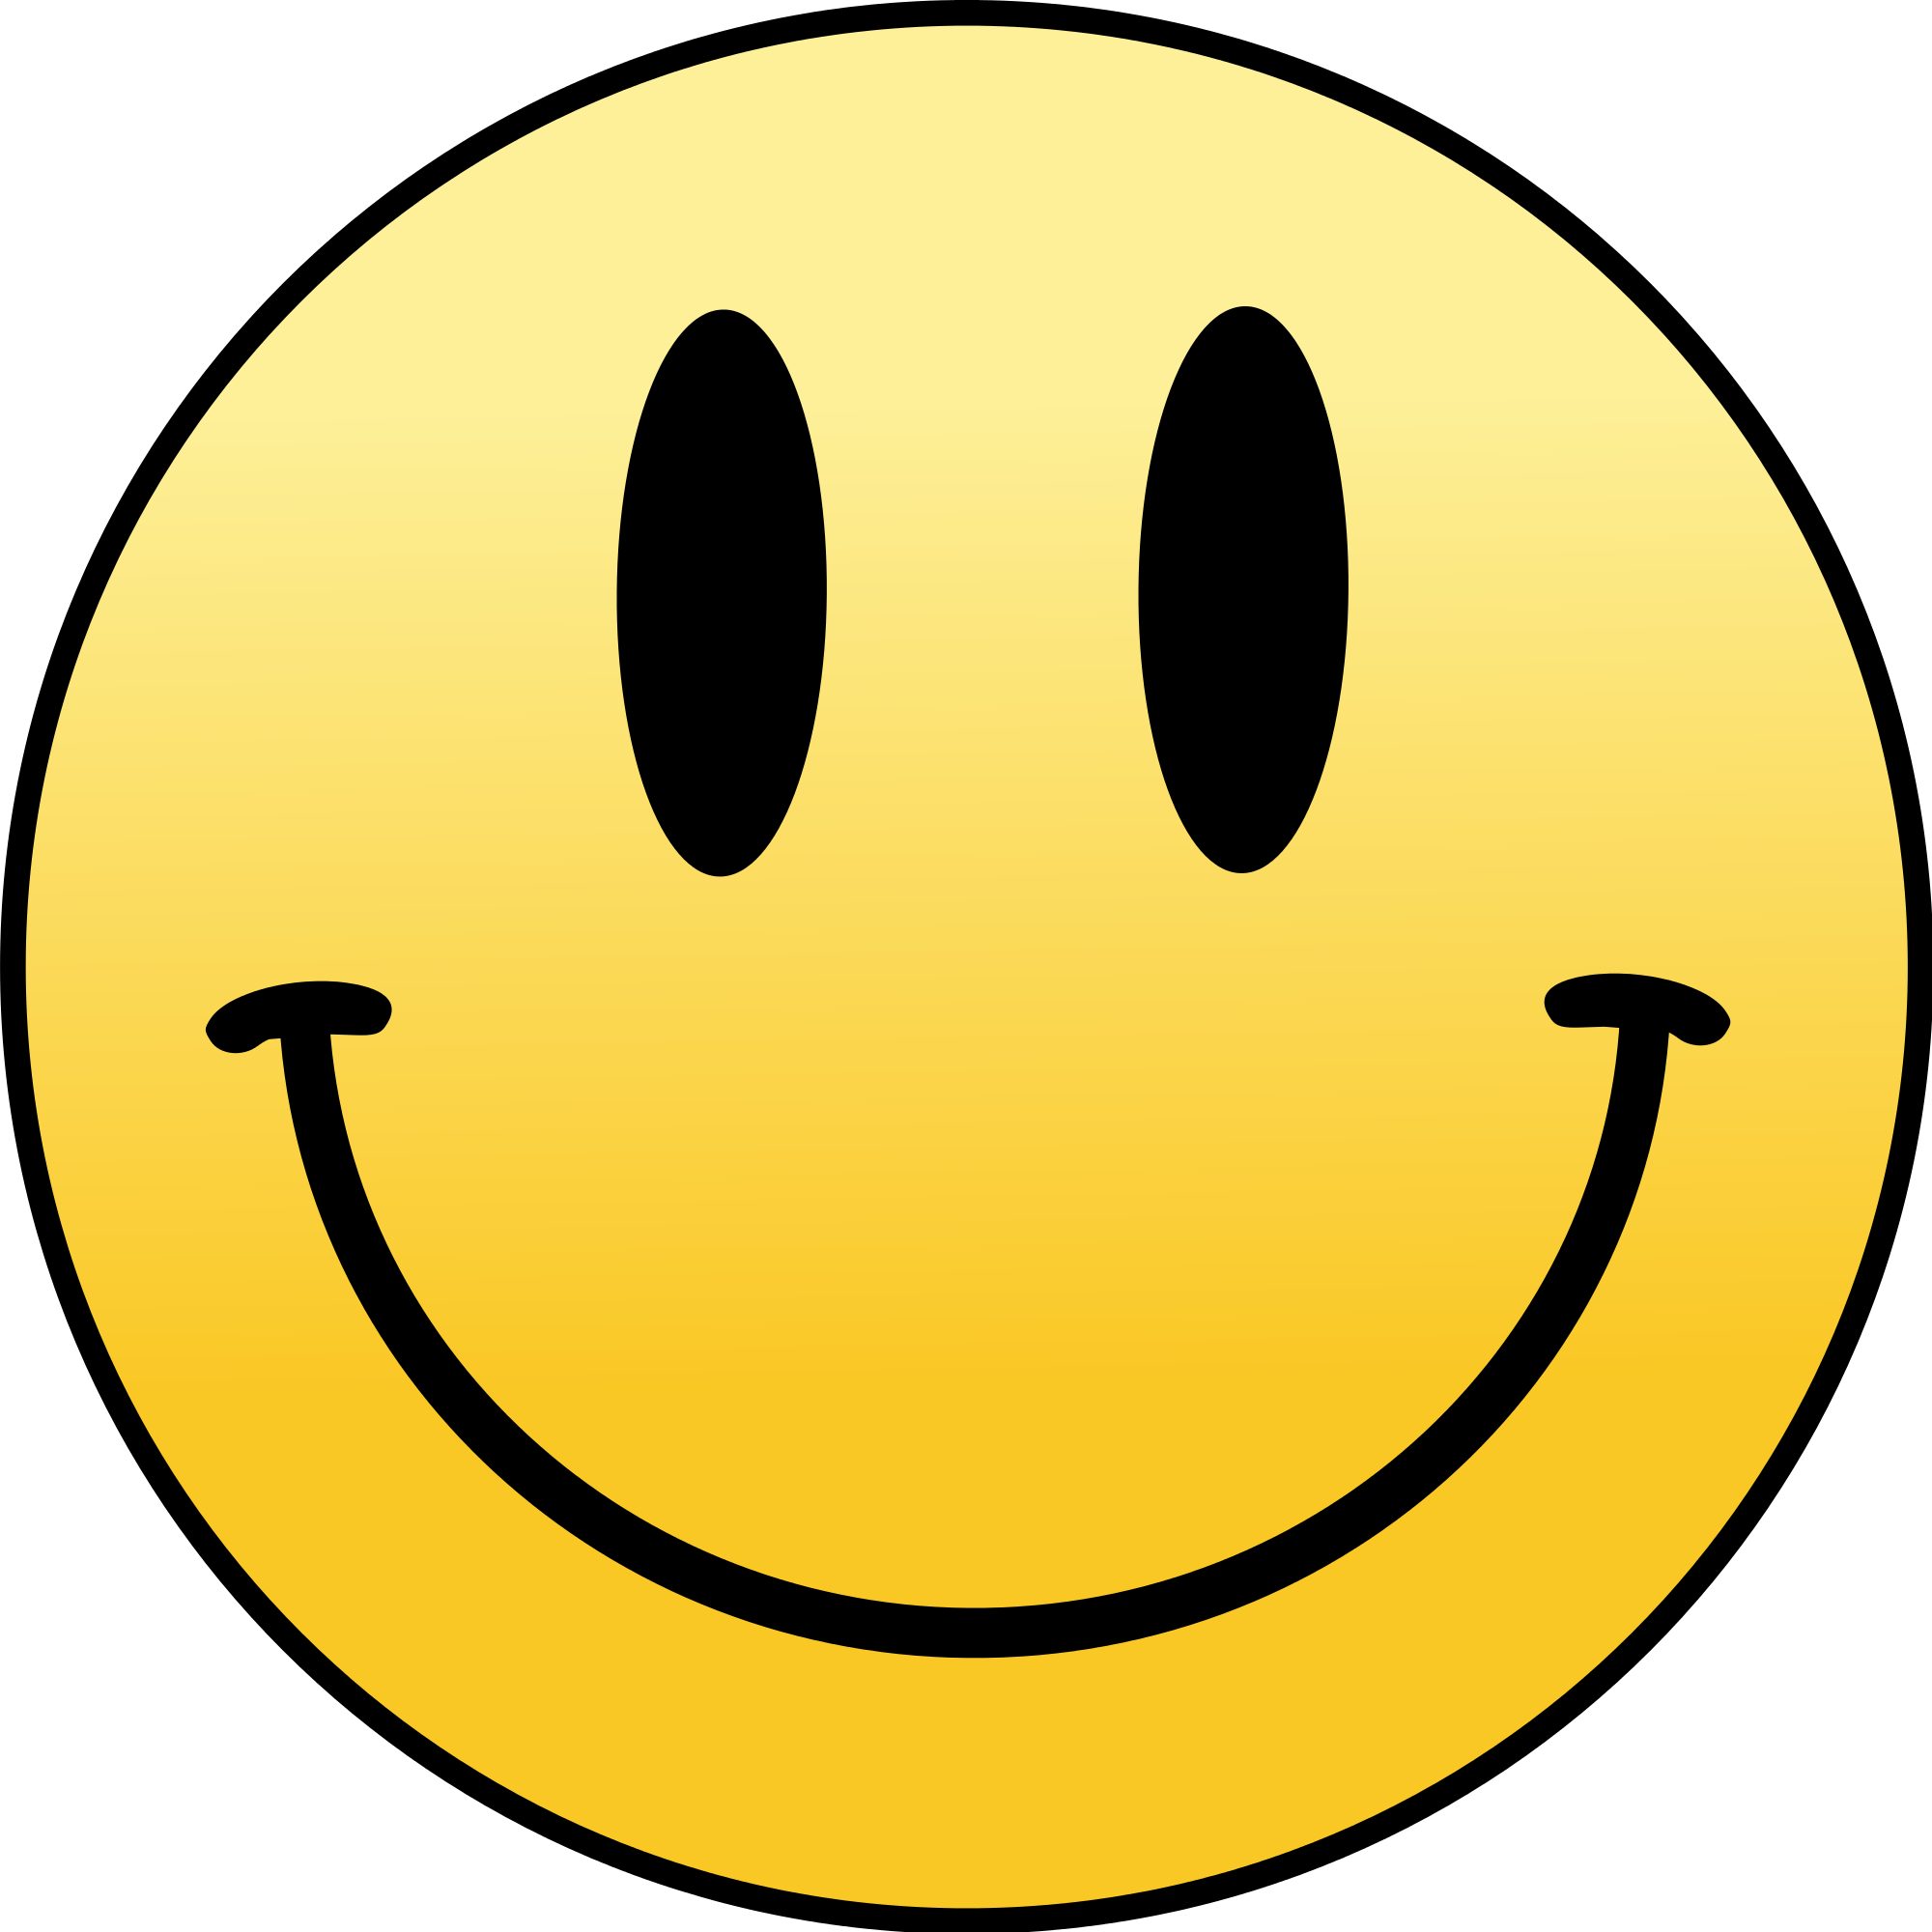 Smiley Face PNG Free Image